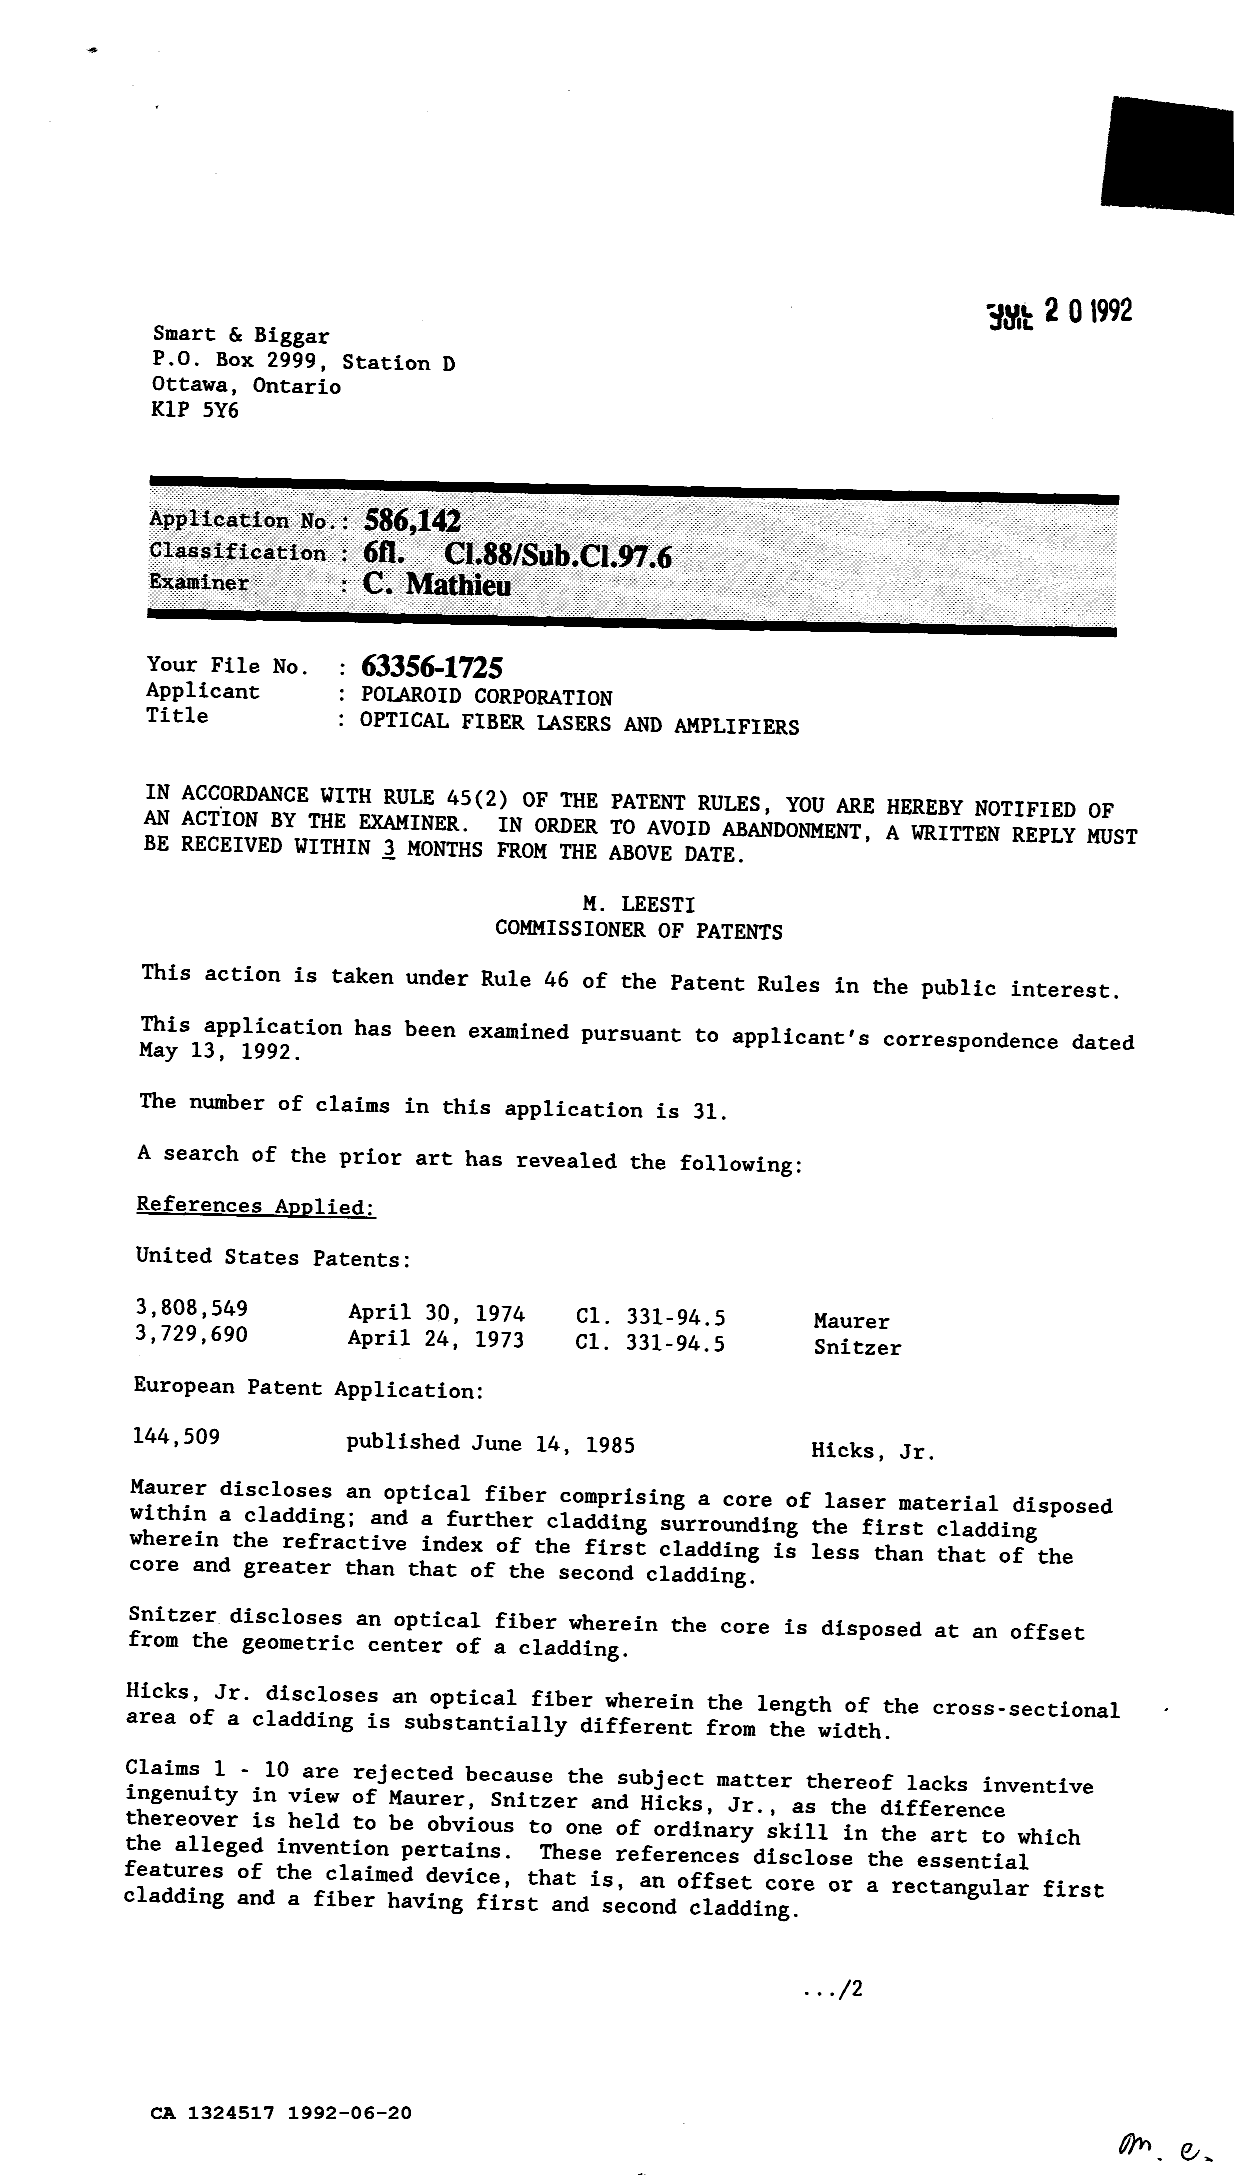 Canadian Patent Document 1324517. Examiner Requisition 19920620. Image 1 of 2